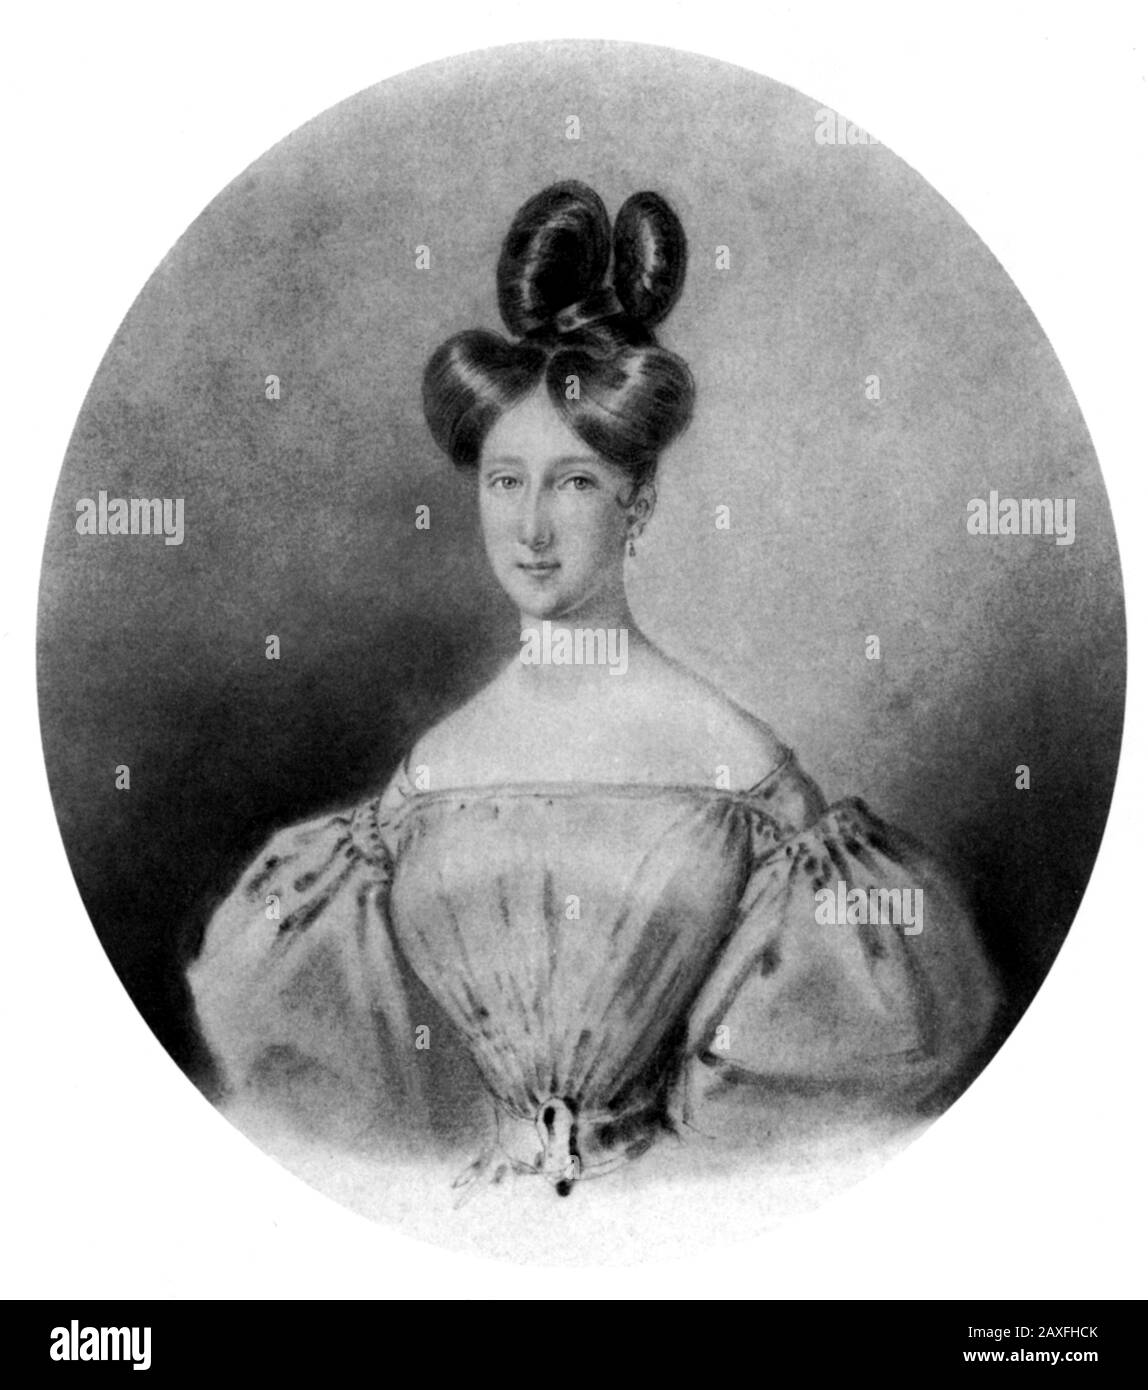 1830 ca, FIRENZE ,  ITALY :  The italian ELEONORA RINUCCI ( Firenze 1813 - 1886 ), daughter of Marchese Pierfrancesco Rinucci and Teresa of Marchesi Antinori . Married in 1834 with Conte NERI CORSINI Marchese di Lajatico ( Firenze 1805 - London 1859 ), the couple have 8 sons. The first son was Stock Photo